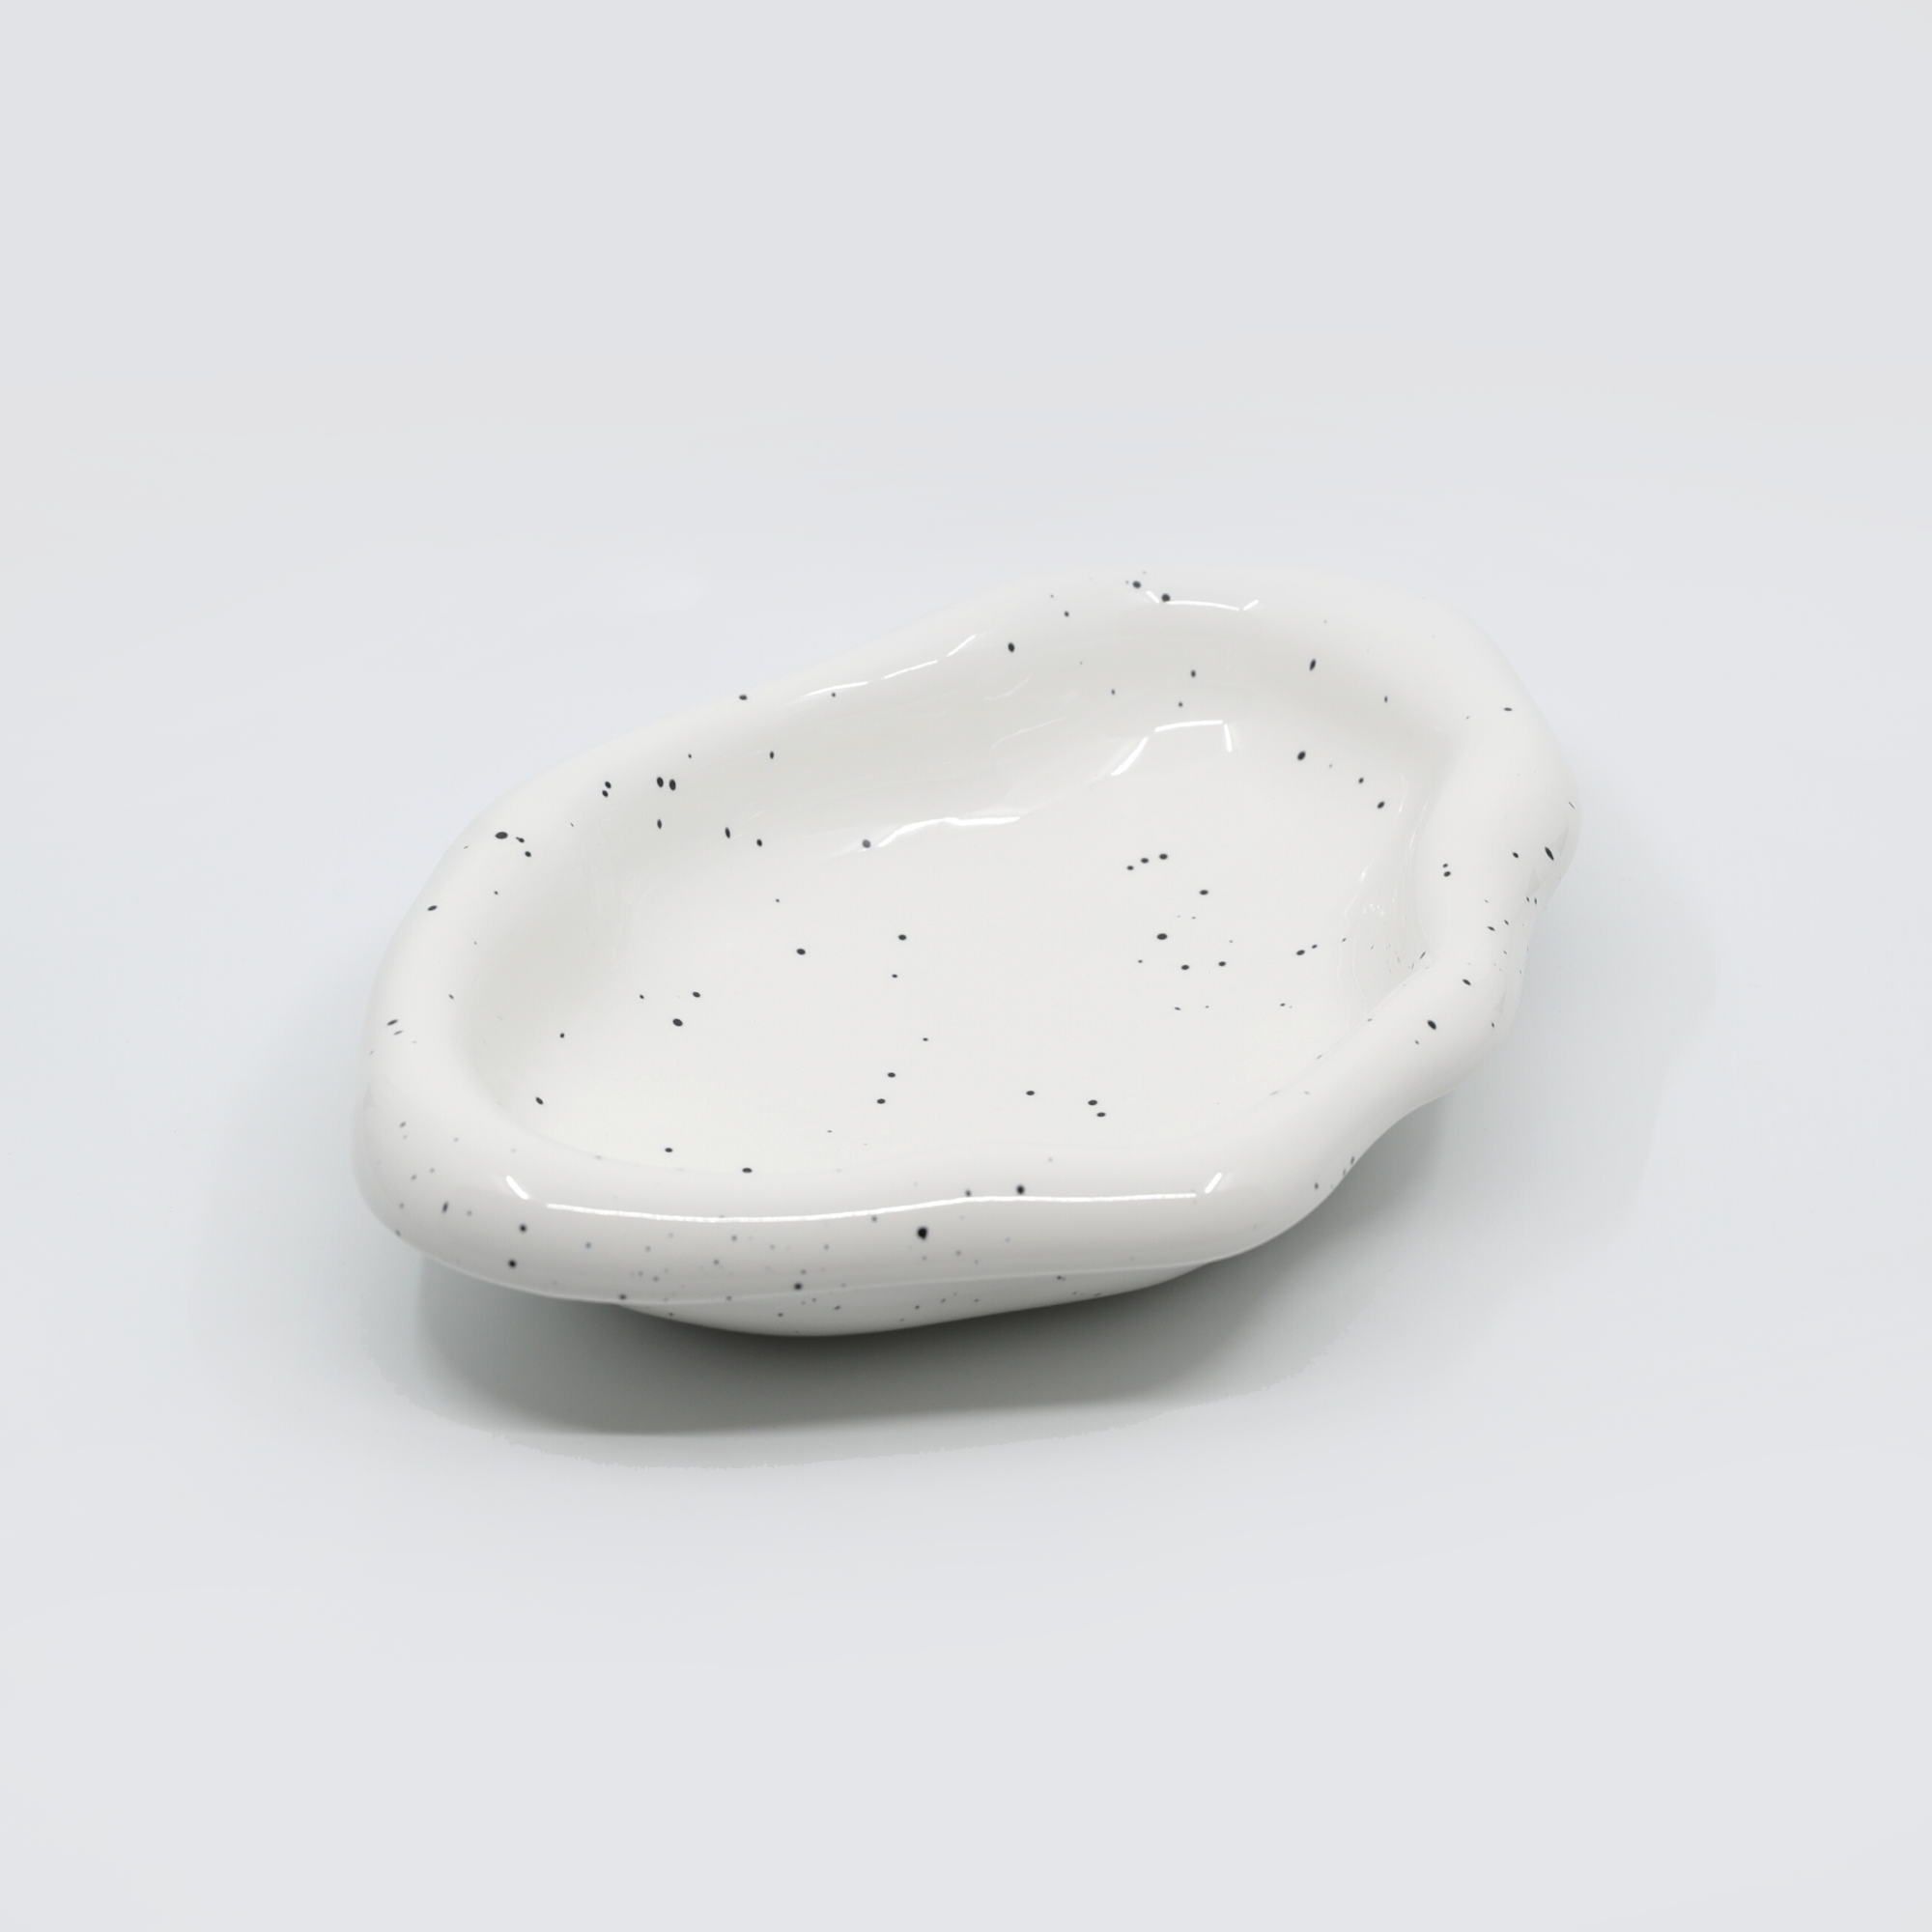 Warbled Ceramic - Small Speckled Bowl